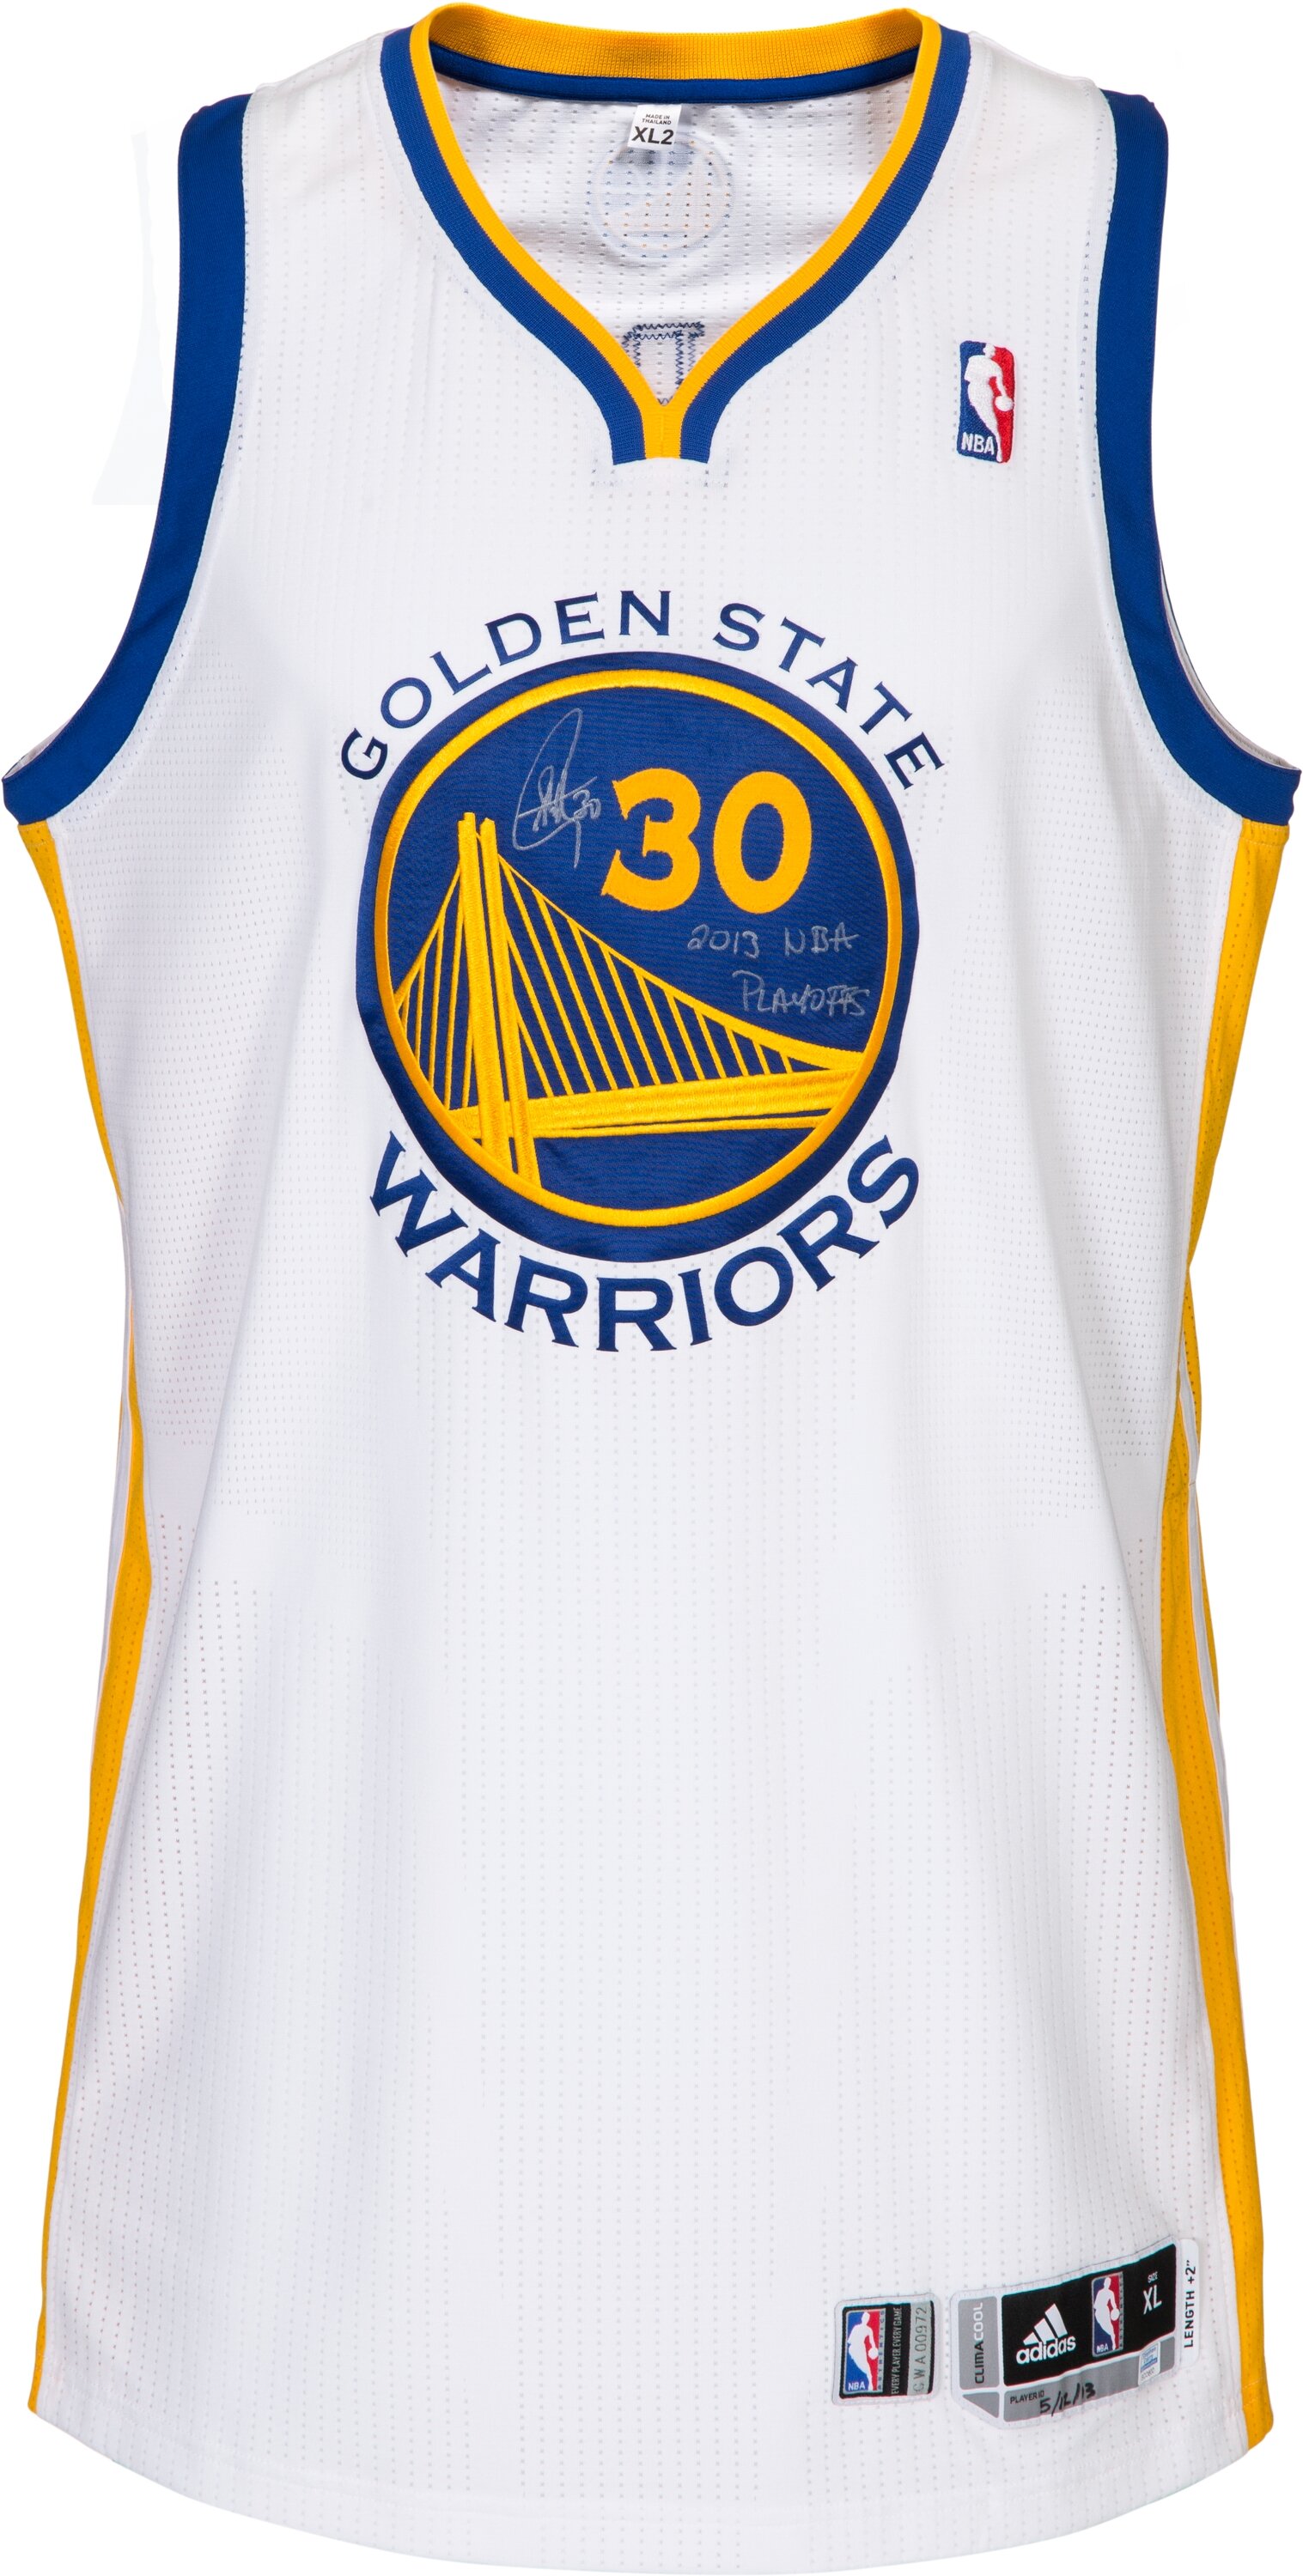 Stephen Curry Jersey Auction: Stephen Curry's jersey which he wore